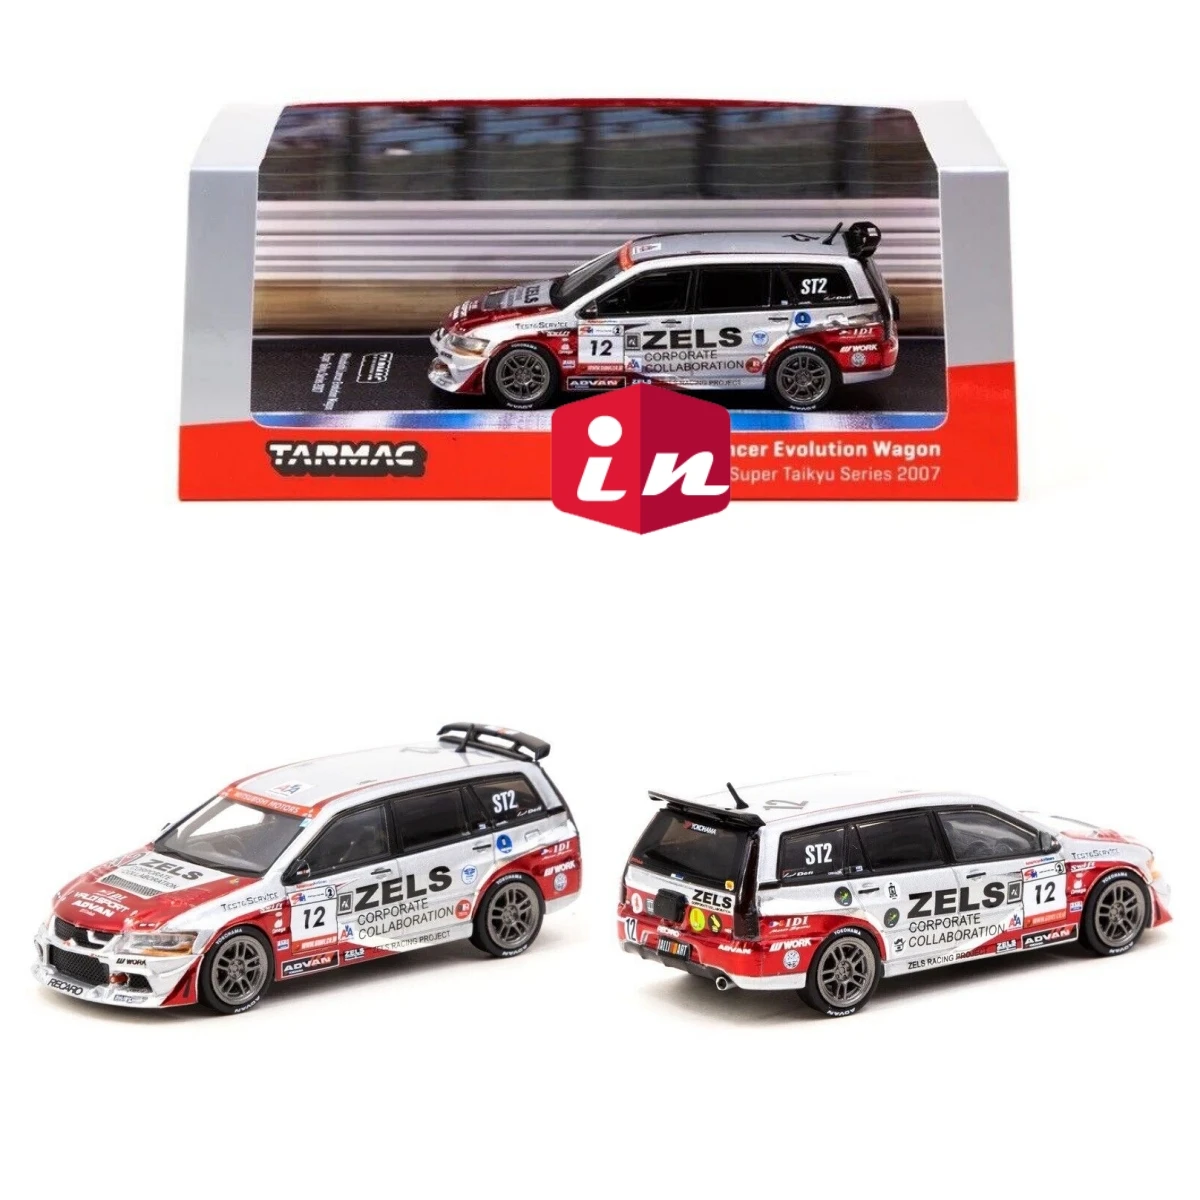 

Tarmac Works 1/64 Lancer Evolution Wagon Super Taikyu Series 2007 #12 DieCast Model Car Collection Limited Edition